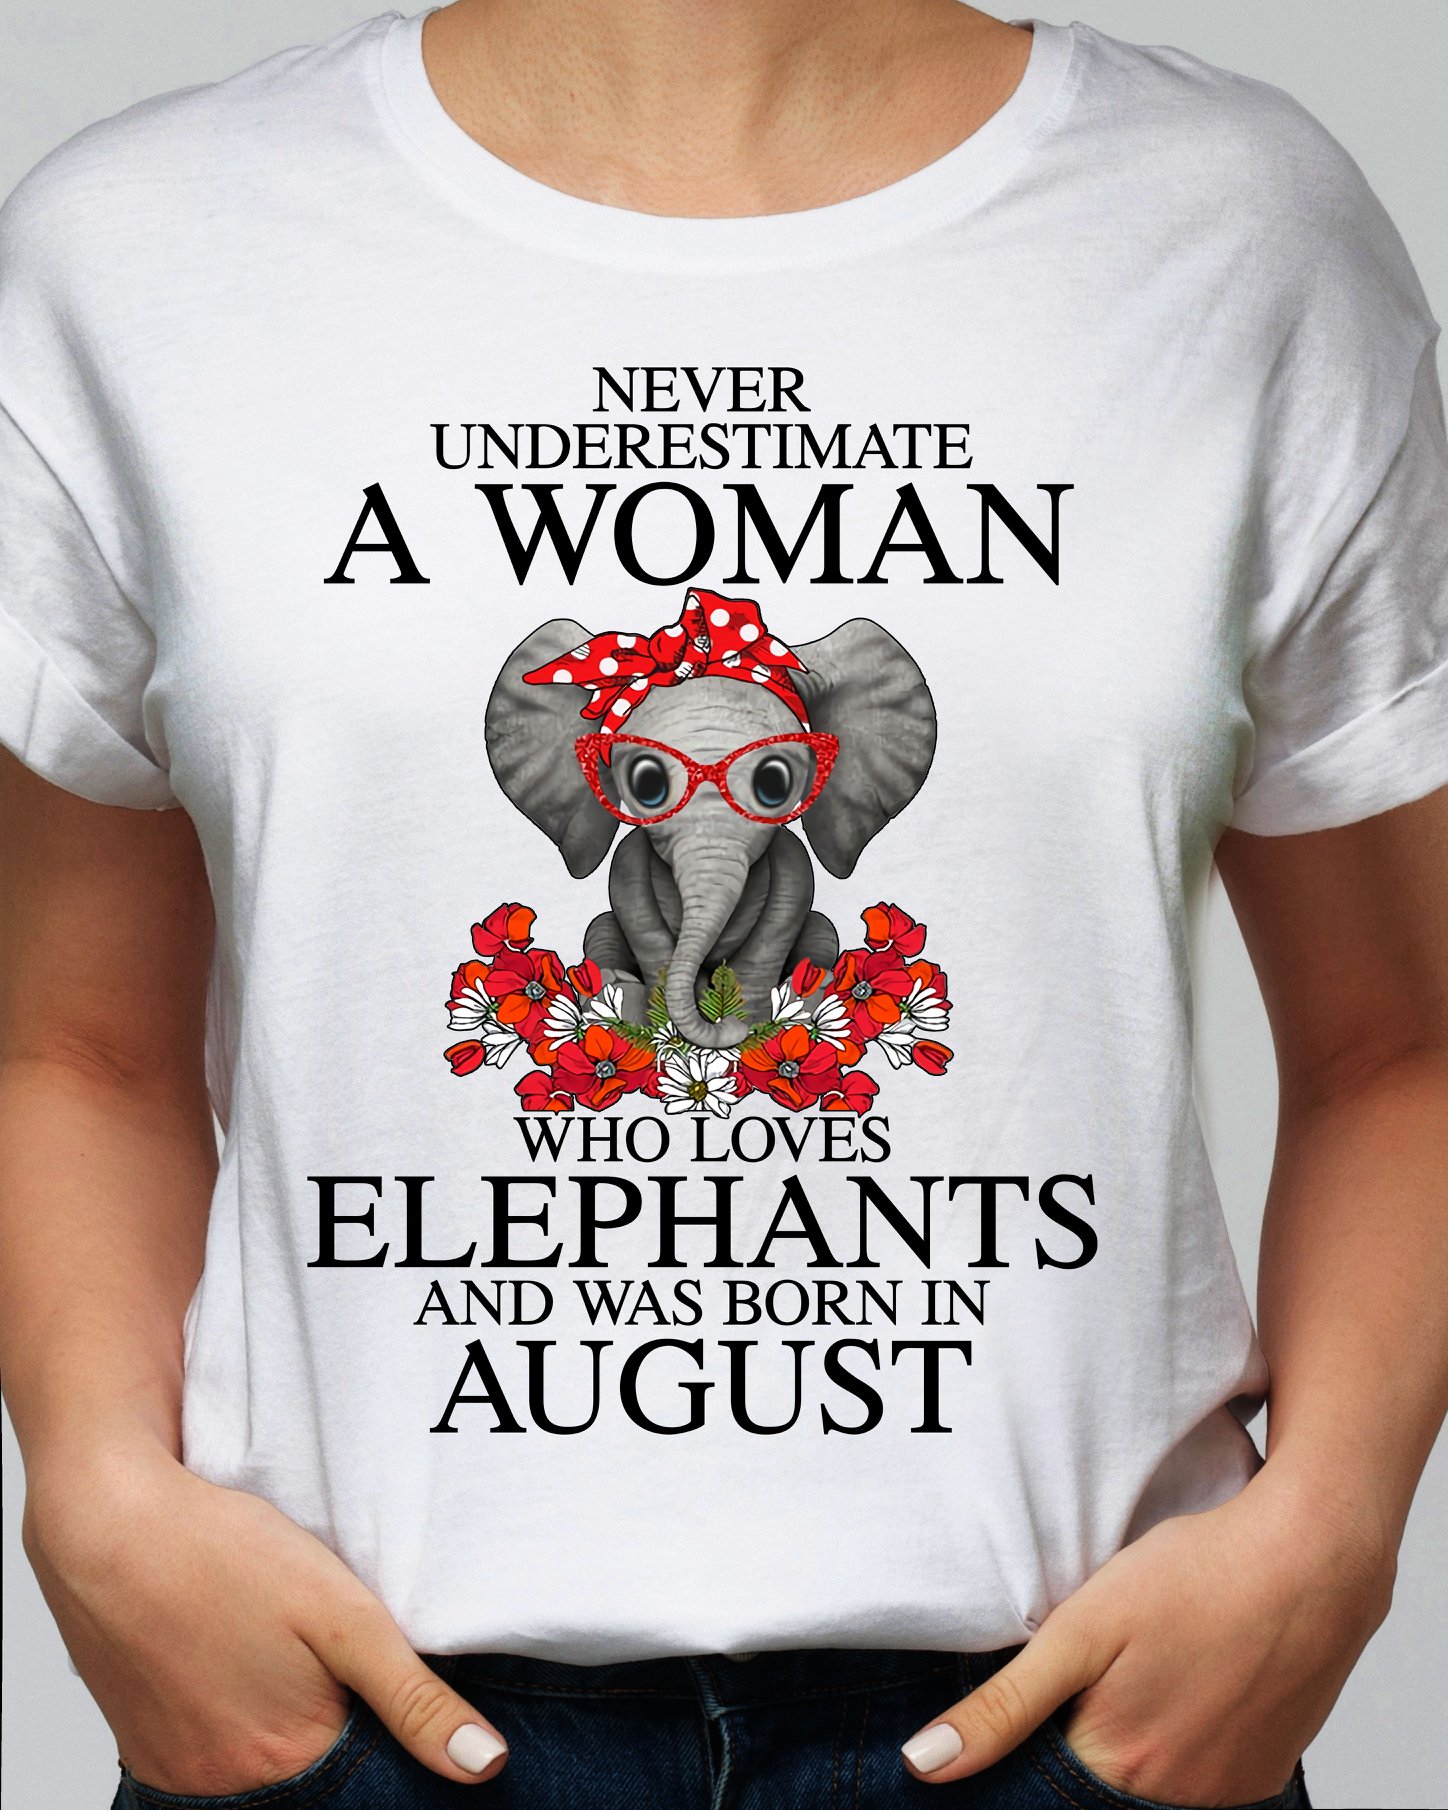 Never underestimate a woman who loves elephants and was born in August